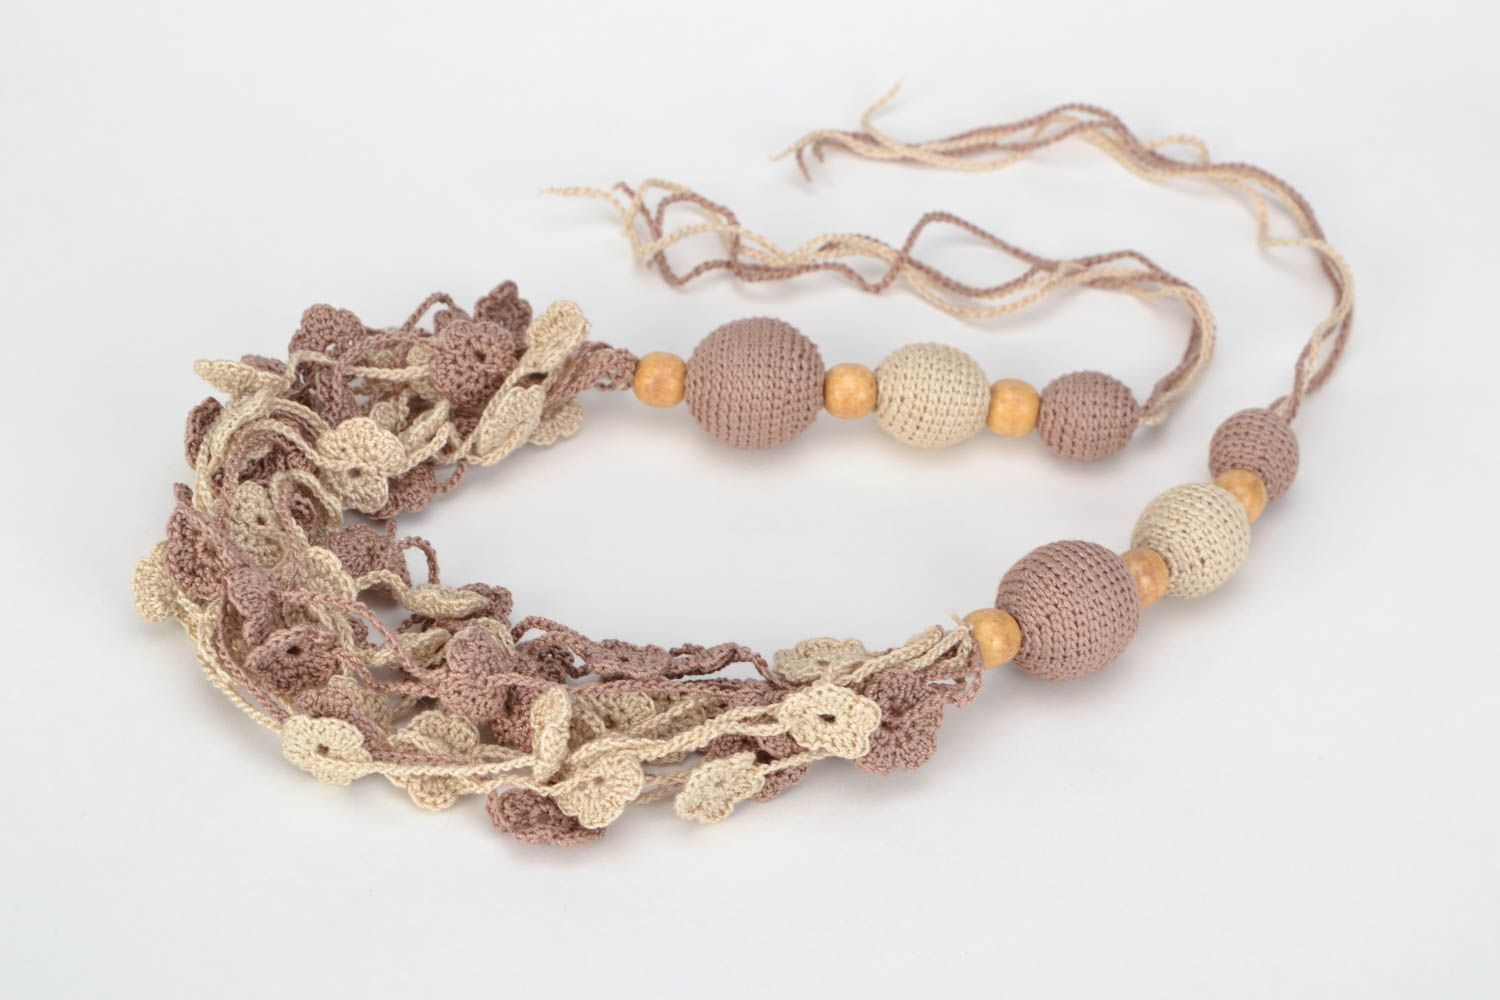 Handmade women's crochet necklace with wooden beads and flowers photo 3